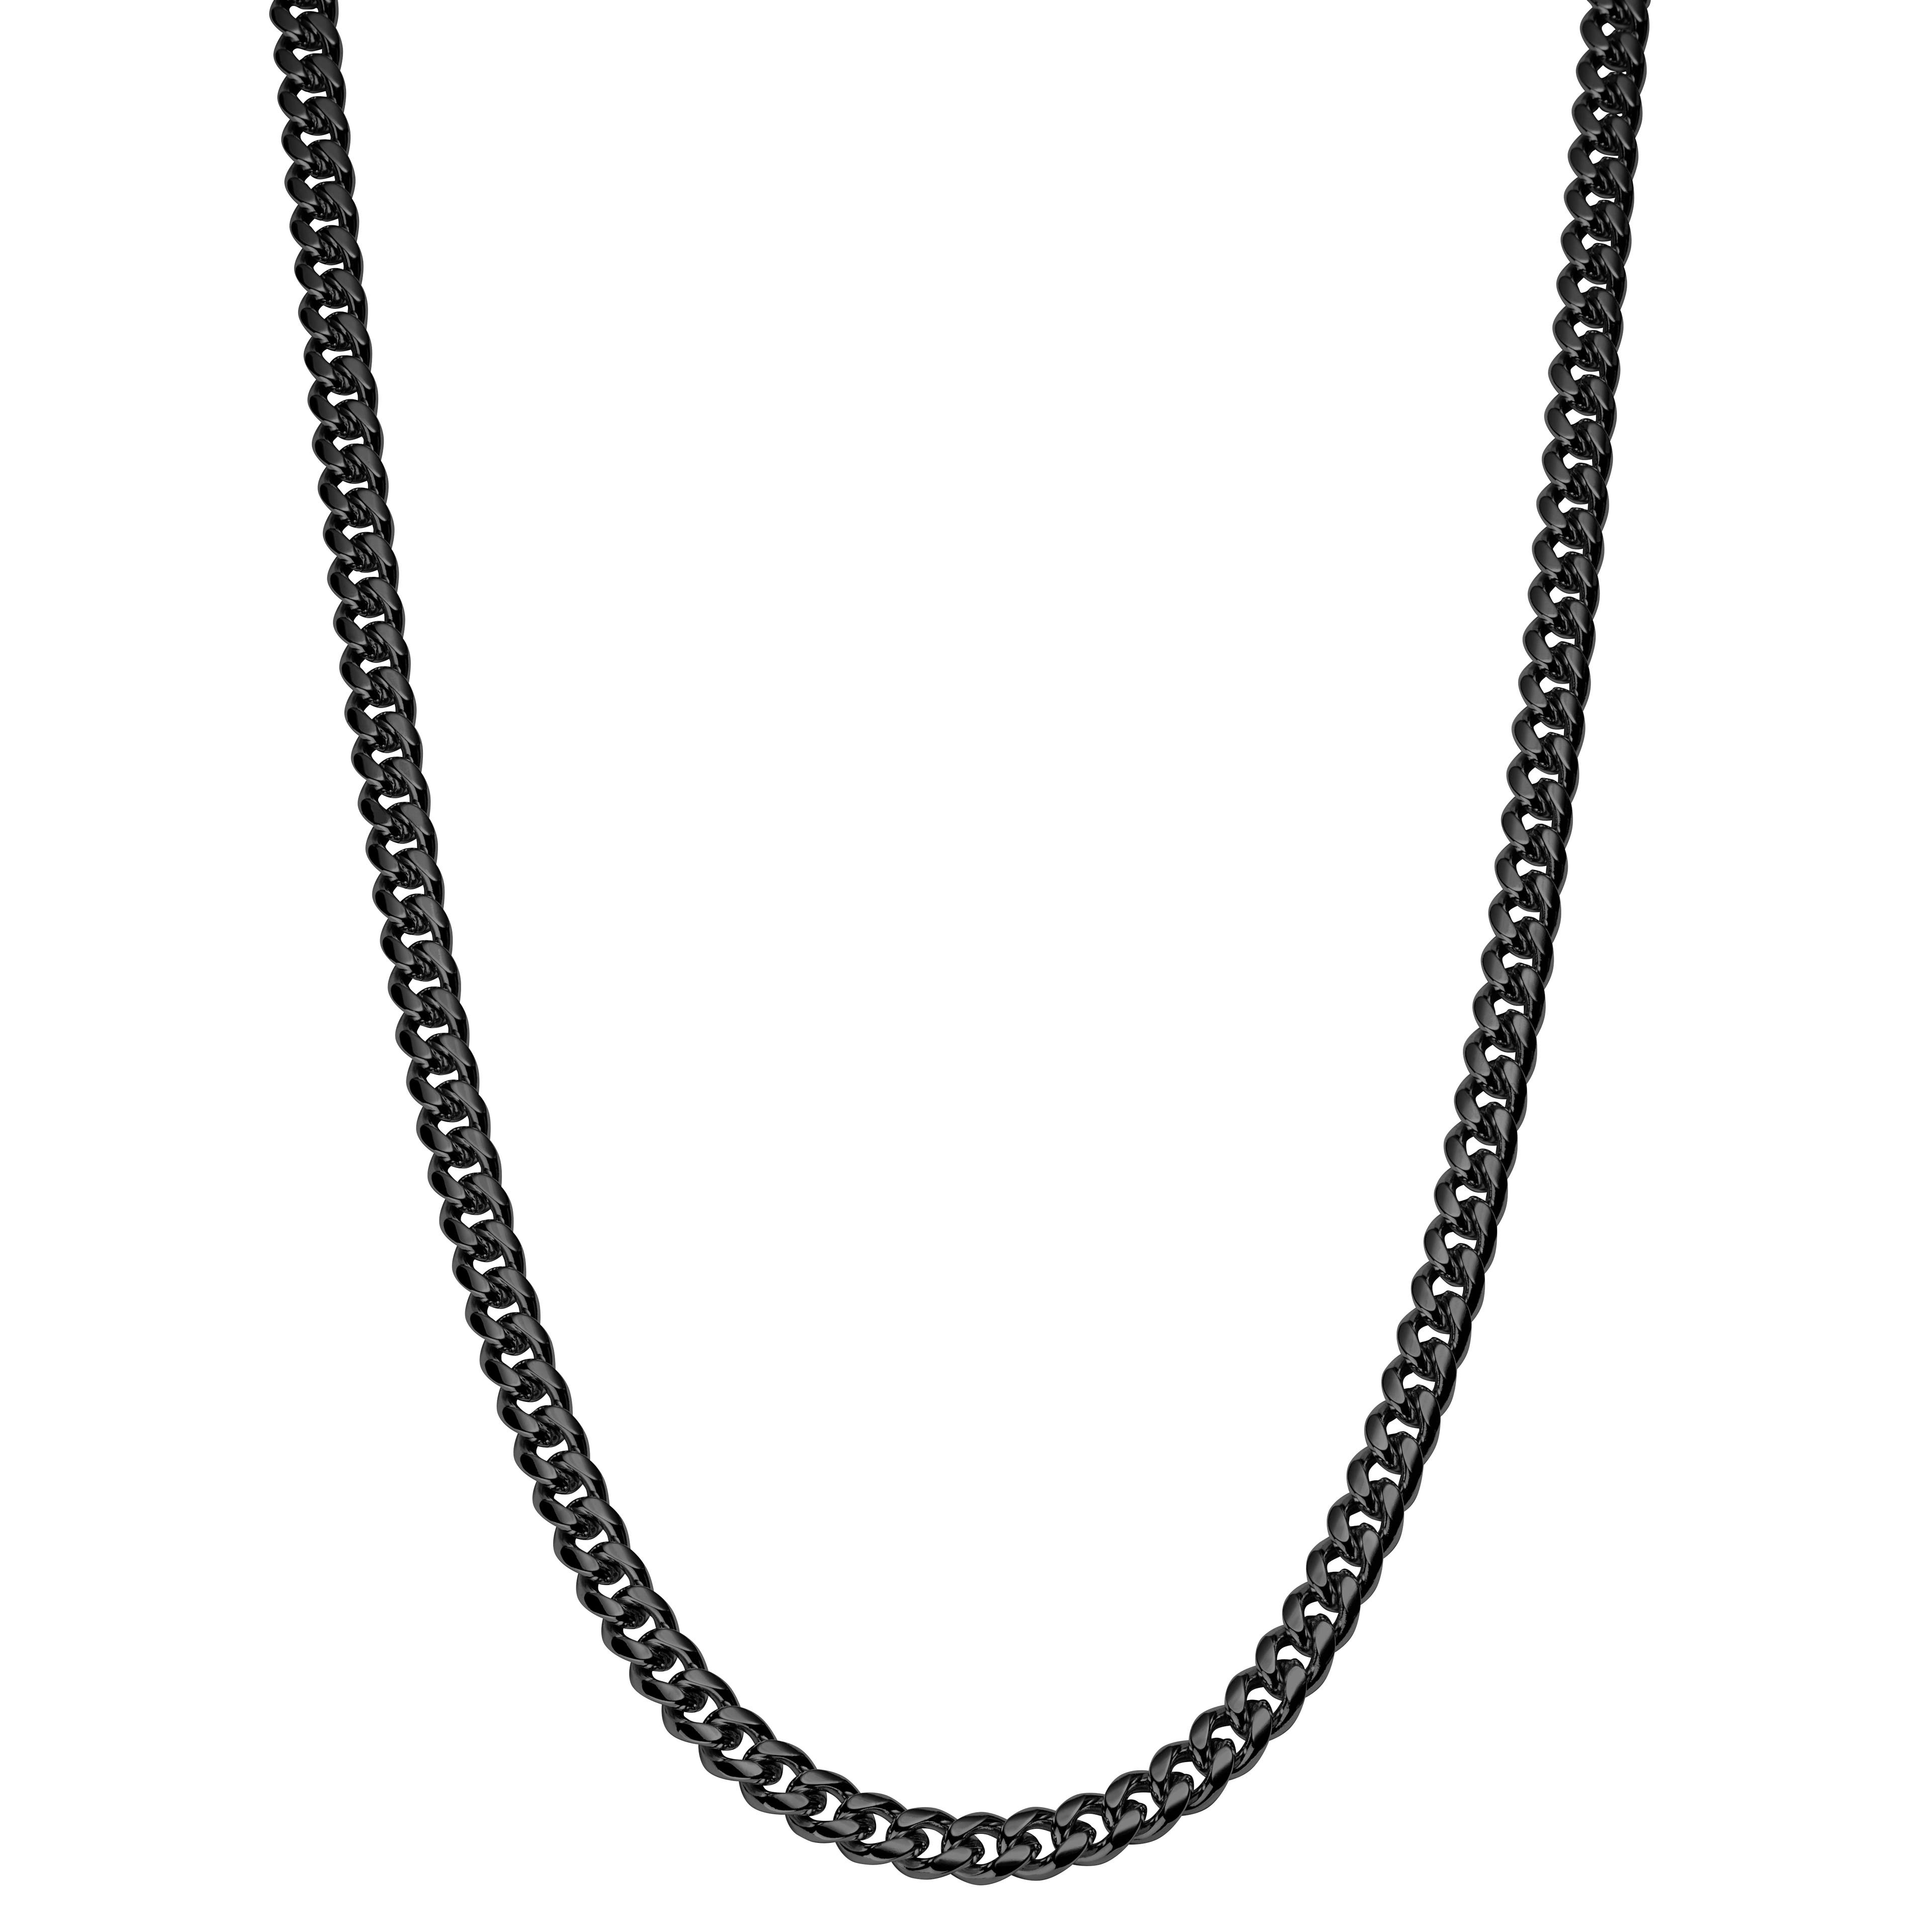 6 mm Black Chain Necklace